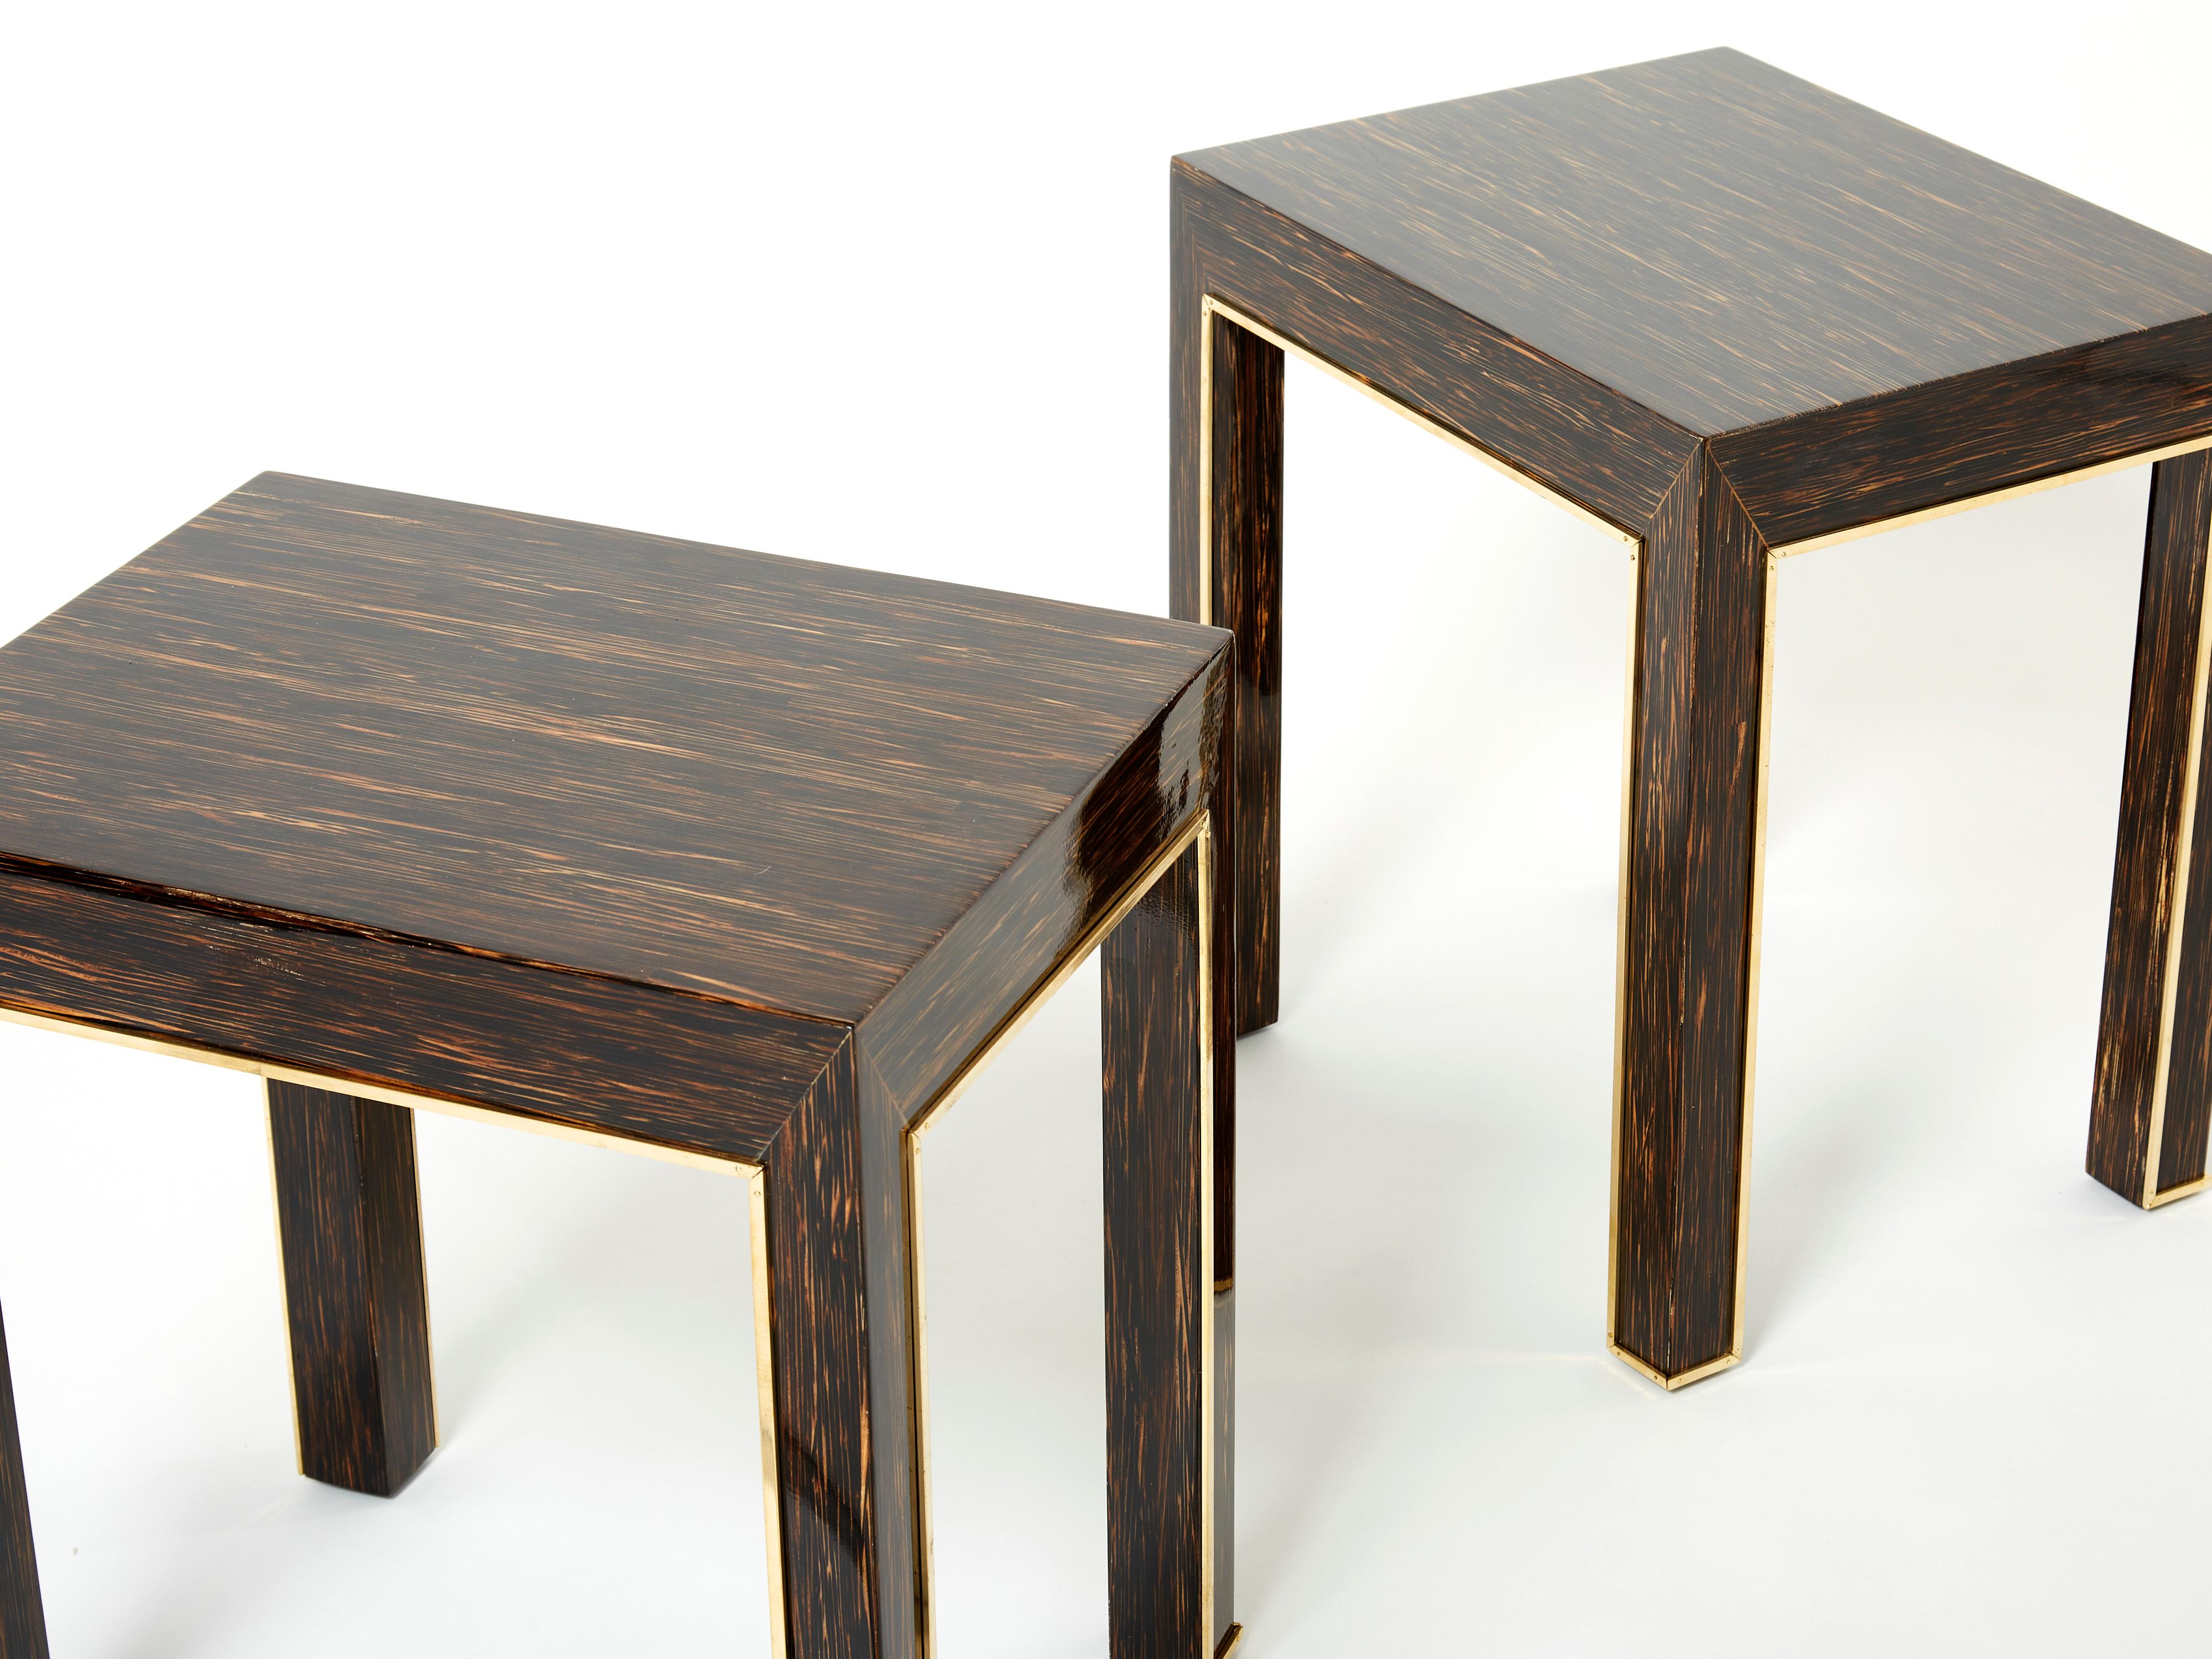 This pair of end tables from the 1970s is a beautiful example of French design firm Maison Romeo Paris. With its sleek look, it feels inspired by Art Deco design, reminiscent of the collaborative work from Jacques Adnet and Jacques Lenoble. The